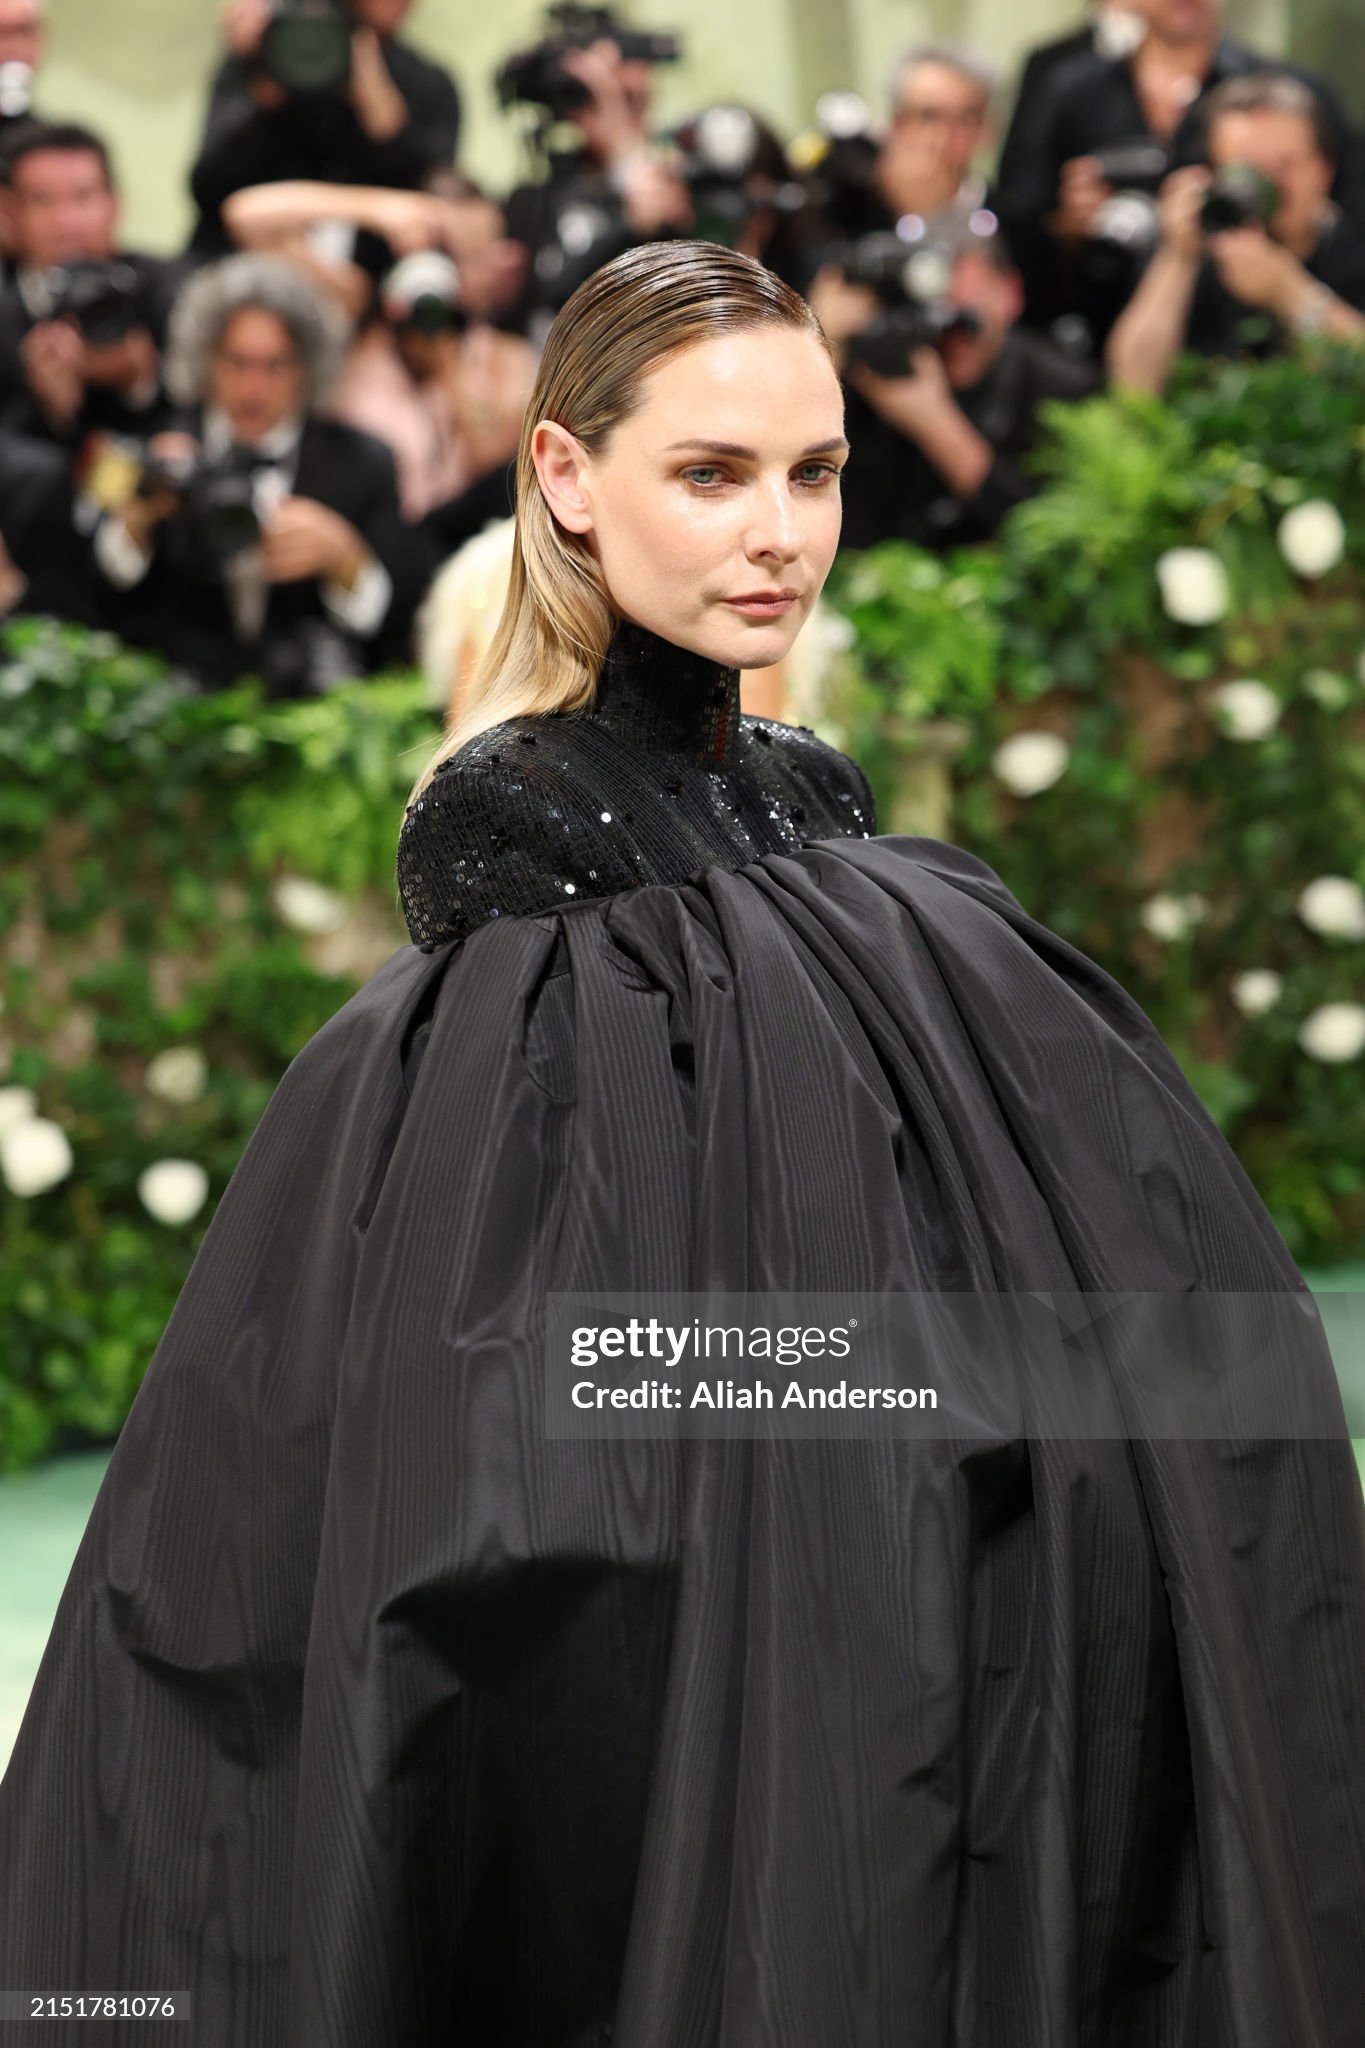 gettyimages-2151781076-2048x2048.jpg